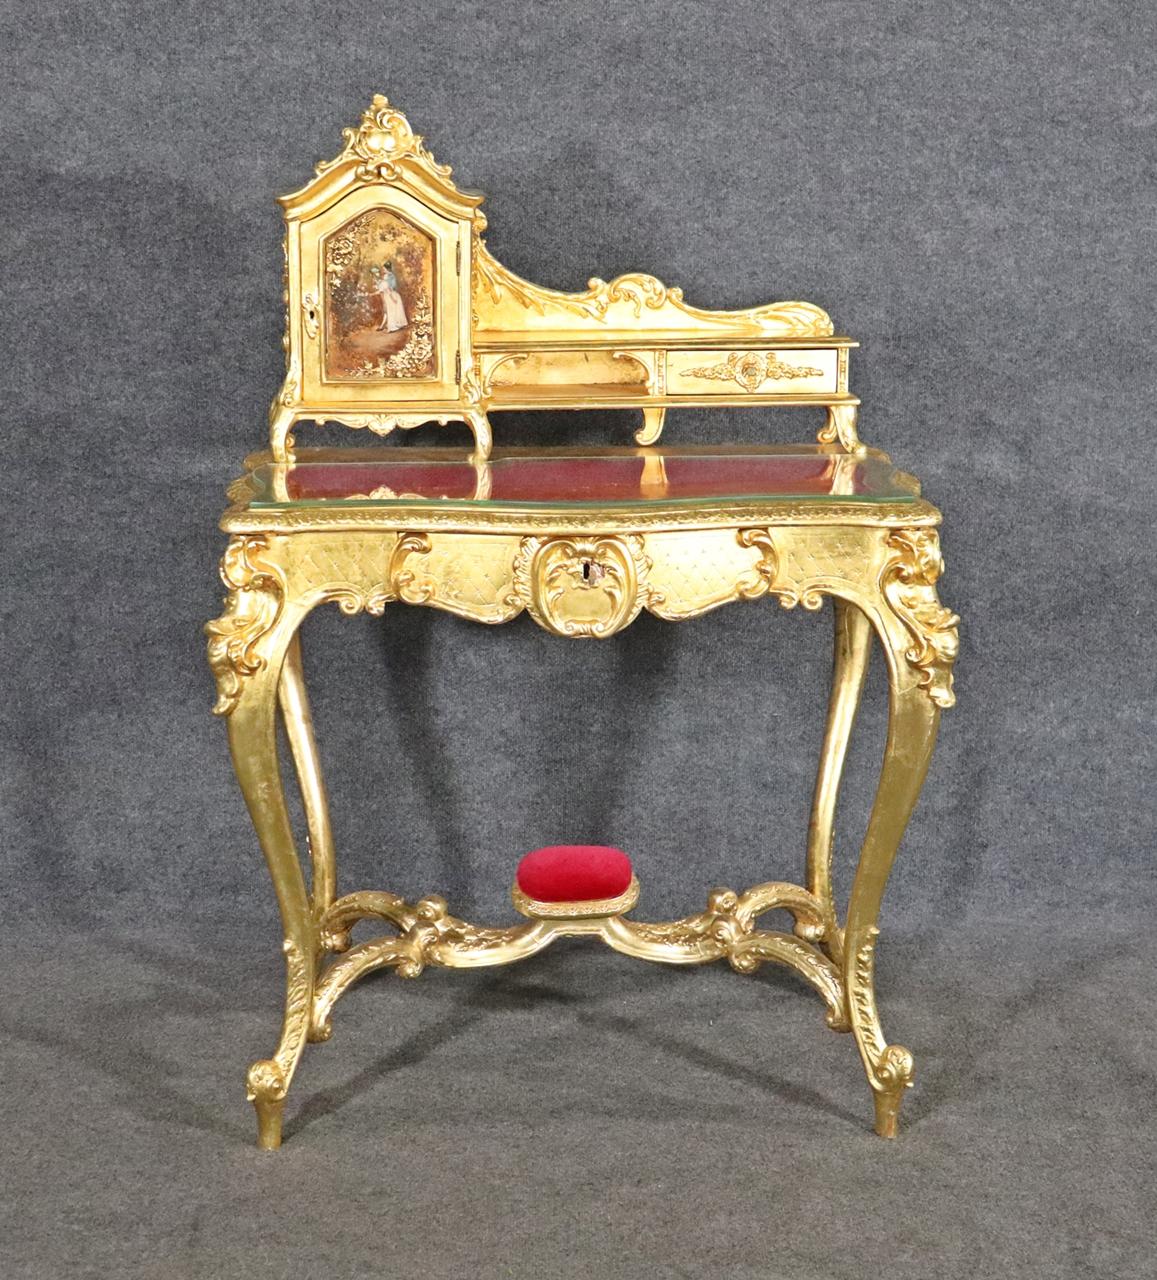 Gilt. Glass top. Removable top compartments. 48 1/2